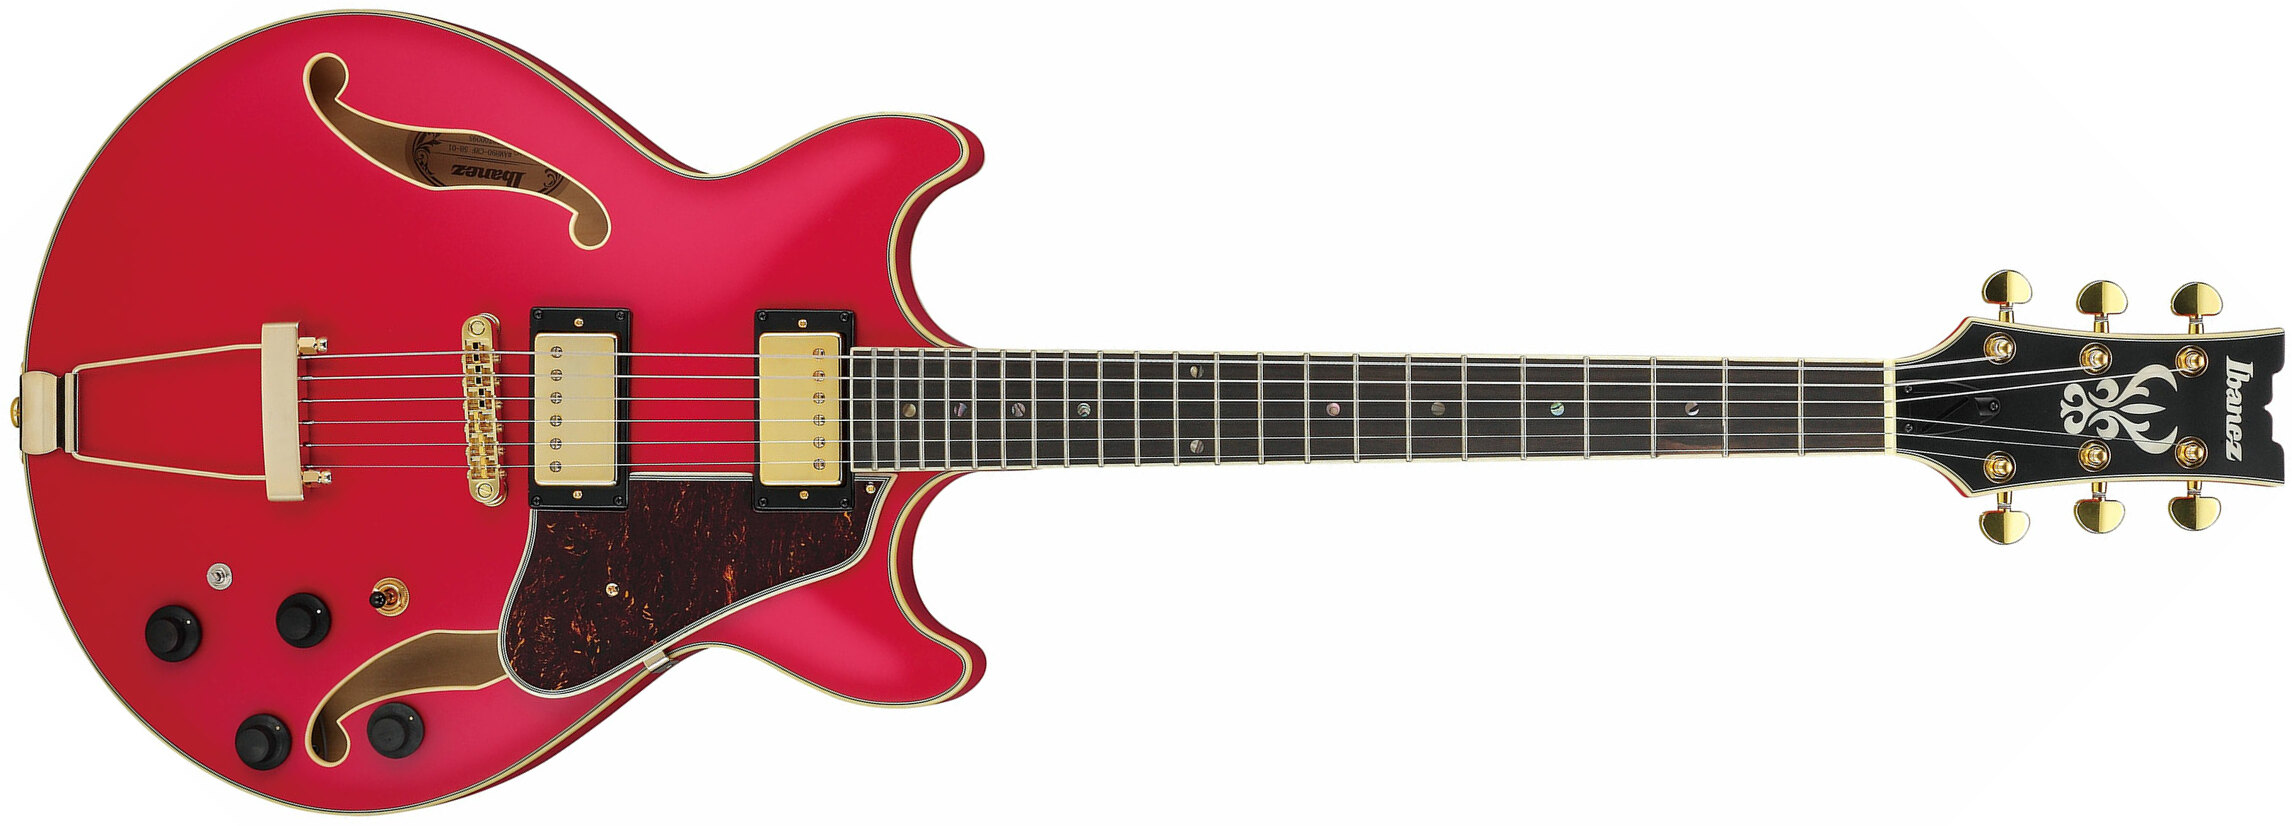 Ibanez Amh90 Crf Artcore Expressionist 2h Ht Eb - Cherry Red Flat - Hollow-body electric guitar - Main picture